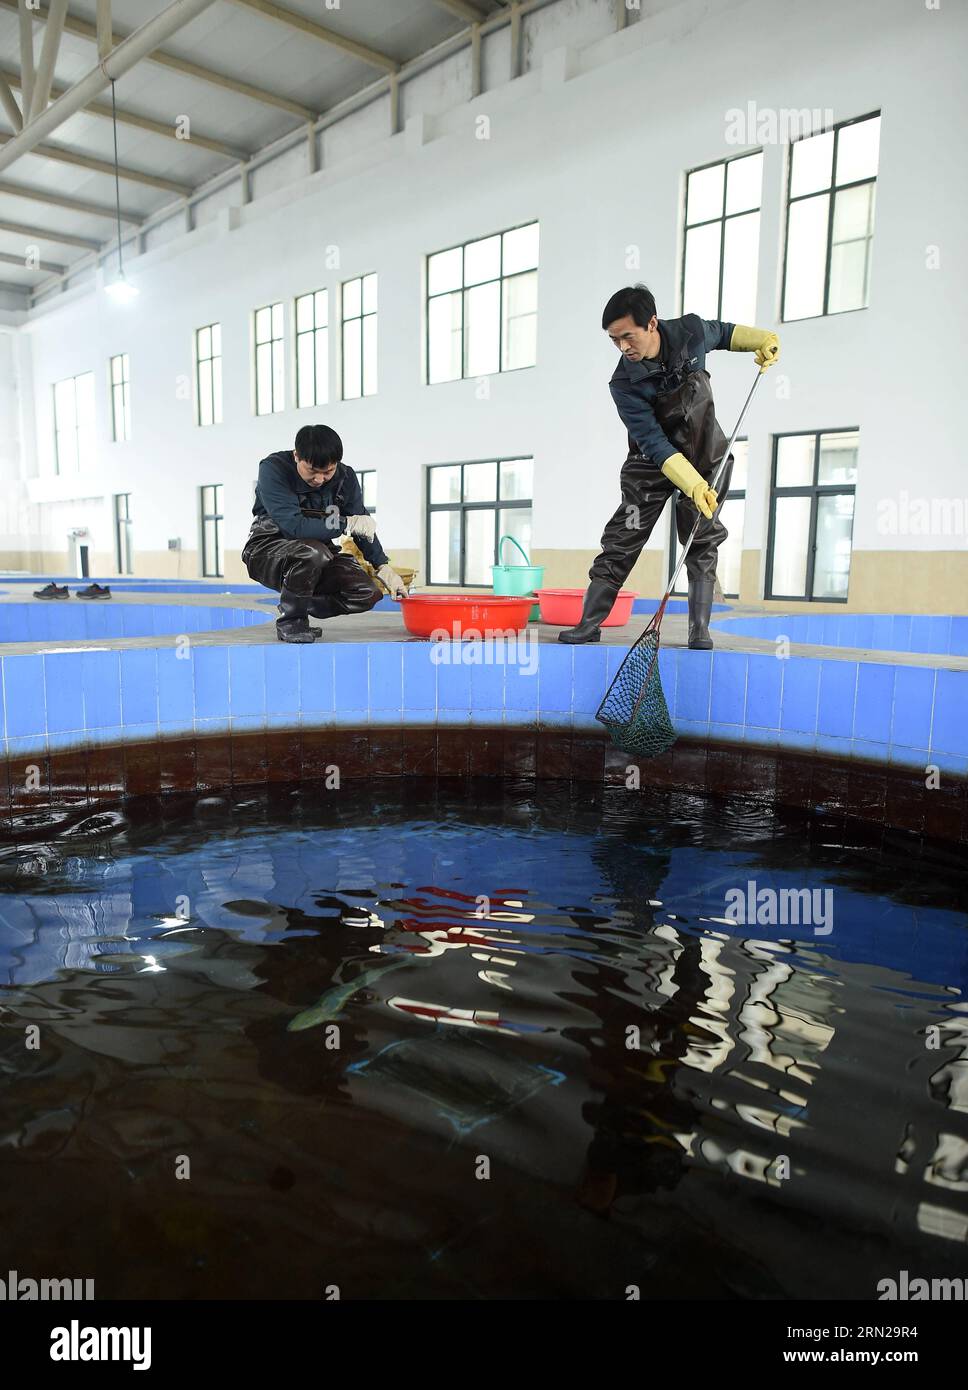 (150219) -- YICHANG, Feb. 19, 2015 -- Breeders clean a tank for artificially-bred Chinese sturgeons at the Chinese Sturgeons Research Institute (CSRI) in Yichang, central China s Hubei Province, Feb. 19, 2015. Chinese sturgeons, nicknamed aquatic pandas , are listed as a wild creature under state protection. Researchers with CSRI succeeded in artificially inseminating and spawning a culture of sturgeons in 2009. Since then fish have been released into the river every year to save the species from extinction. At present, some 5,000 artificially-bred sturgeons live in the CSRI, which is founded Stock Photo